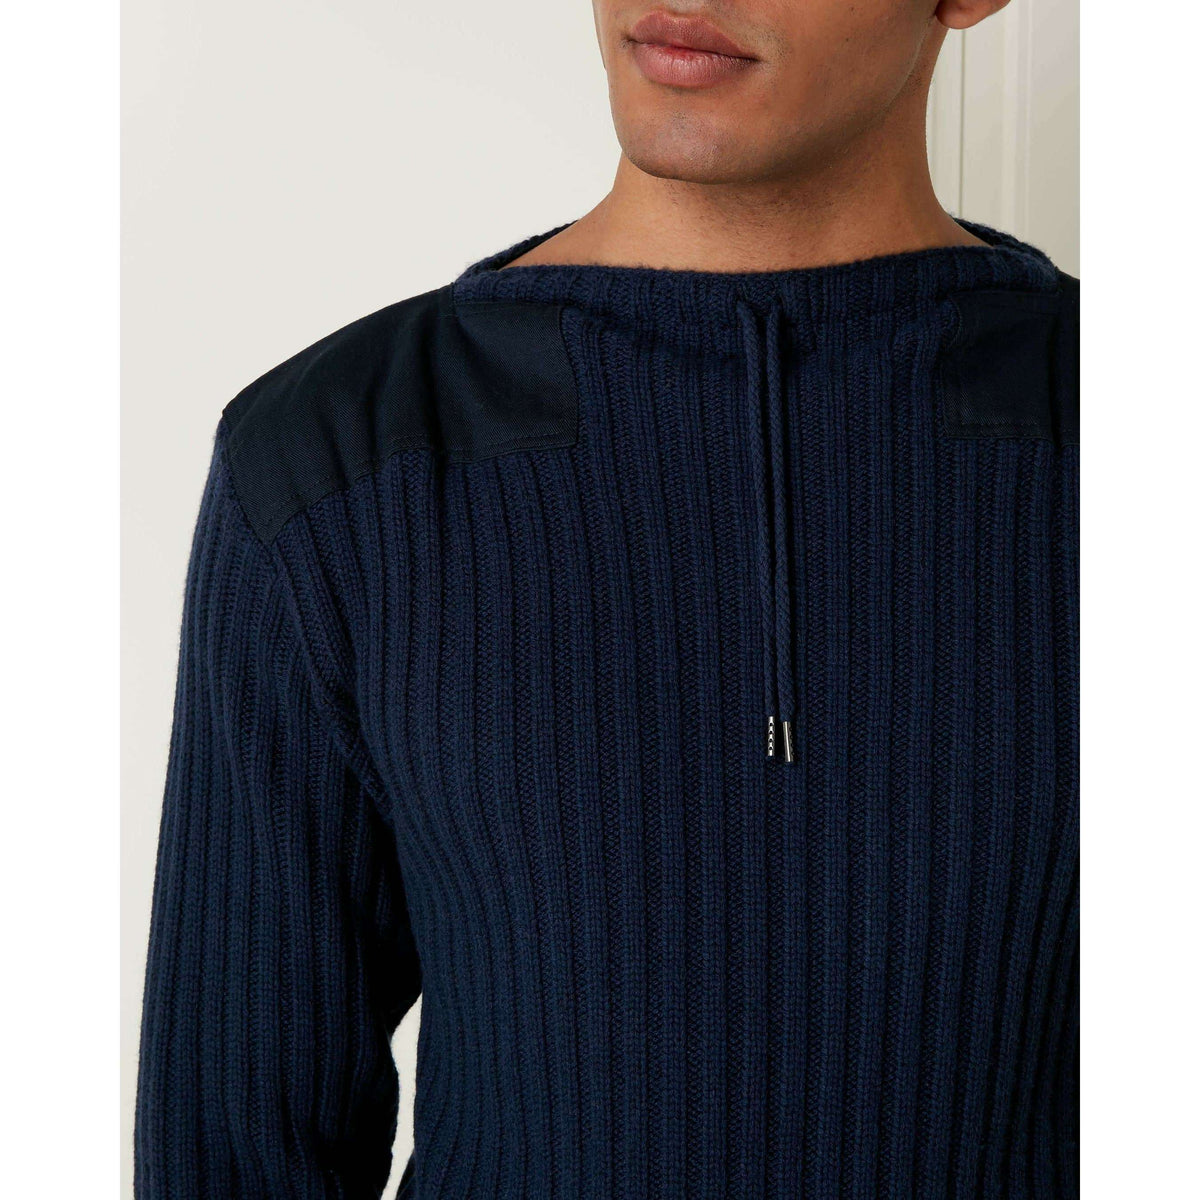 Navy Ribbed Army Sweater - No Time To Die Limited Edition - By N. Peal - 007STORE